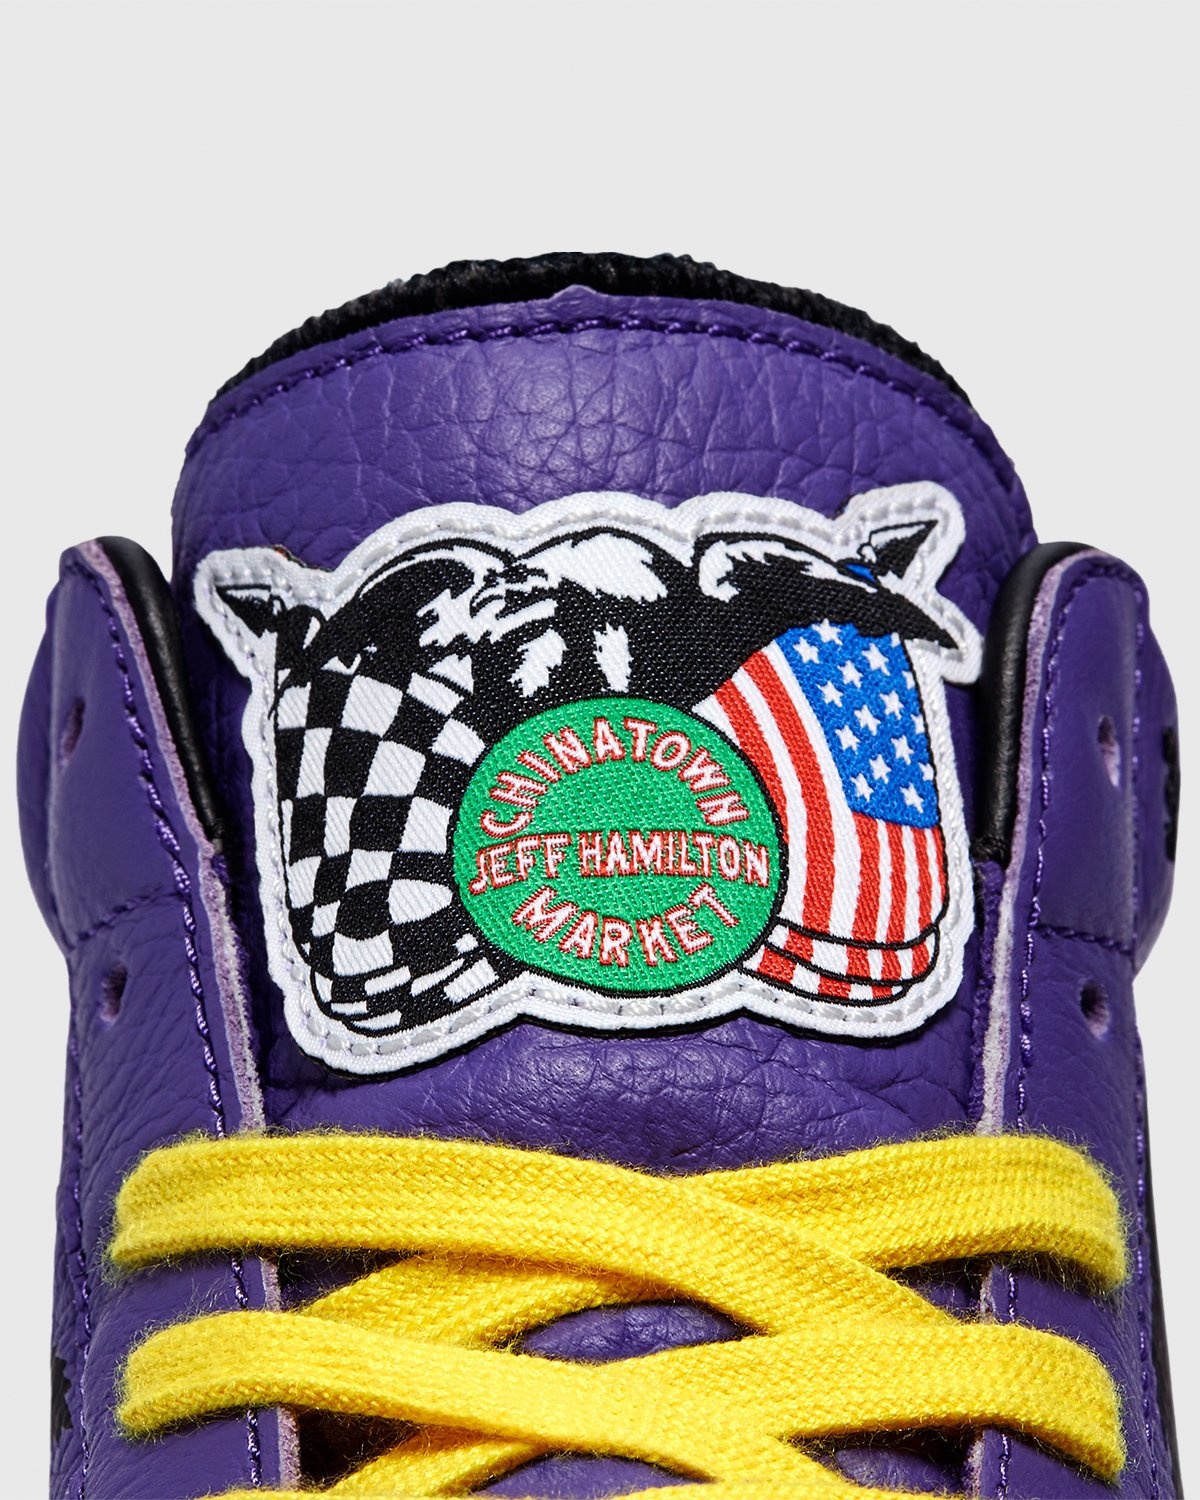 Converse x Jeff Hamilton – Pro Leather High Violet/Poolside - High Top Sneakers - Purple - Image 6